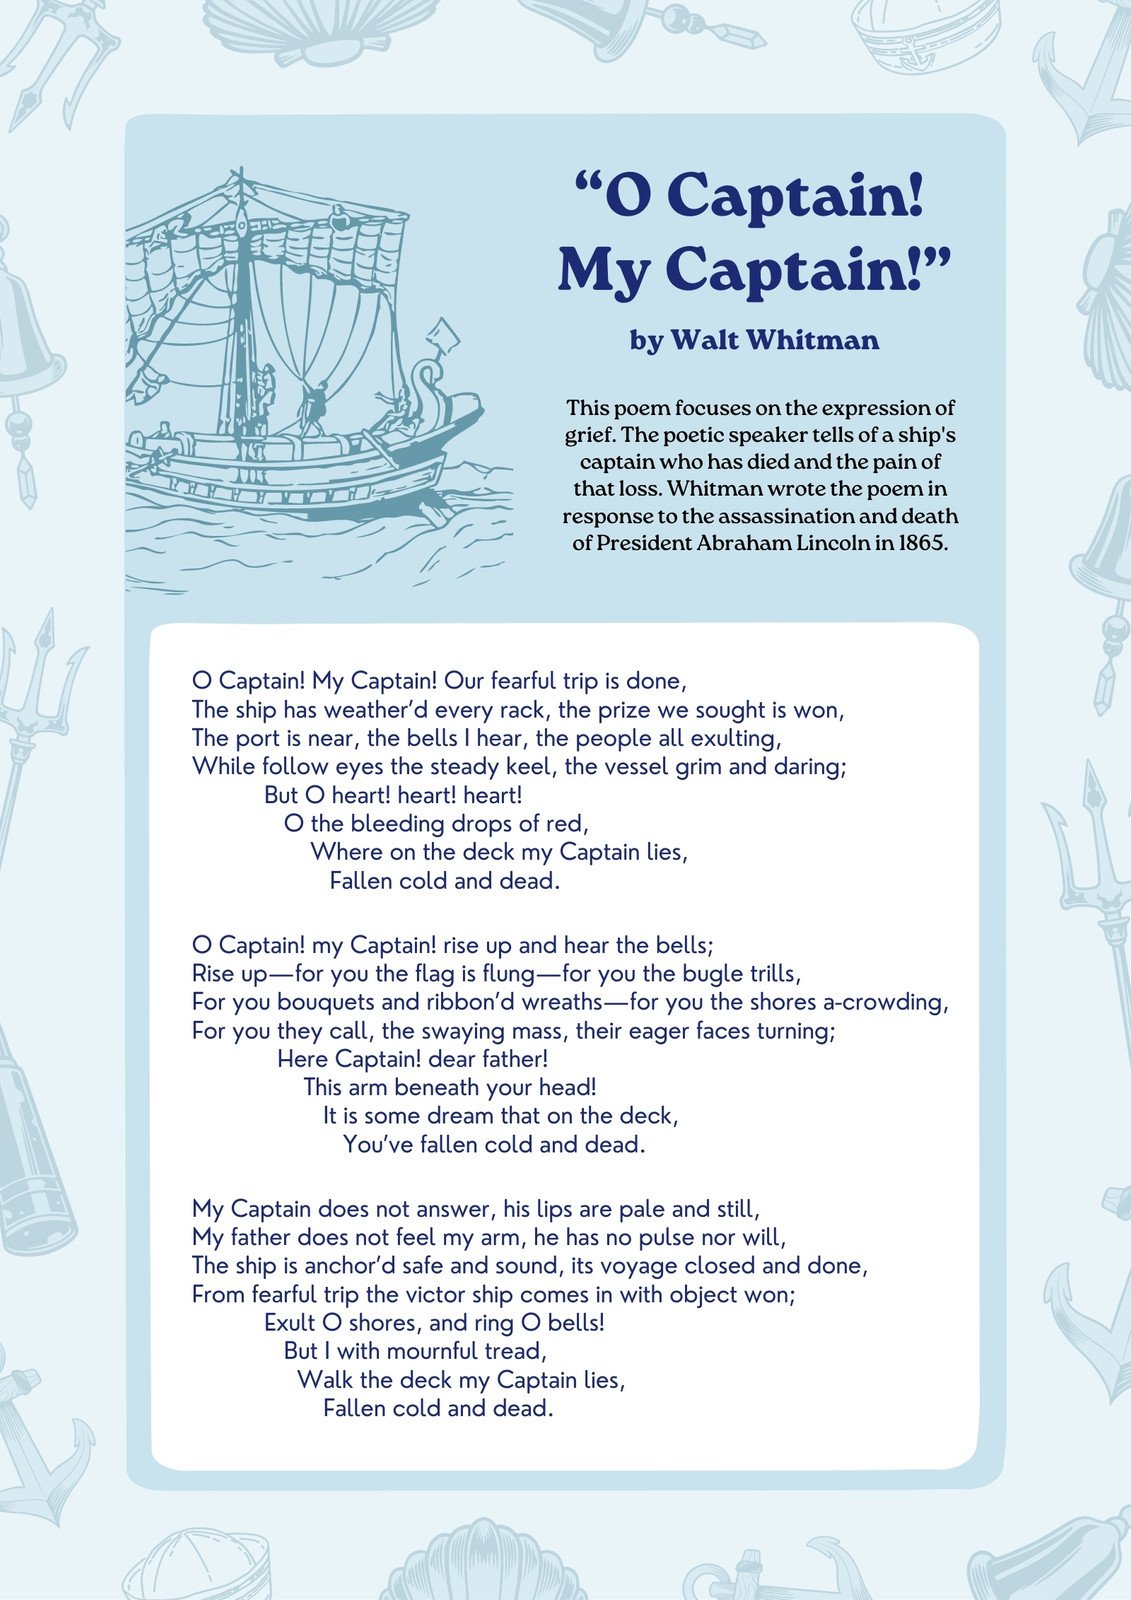 Theme or Central Idea in a Poem Educational Poster in Blue White Friendly Hand Drawn Style